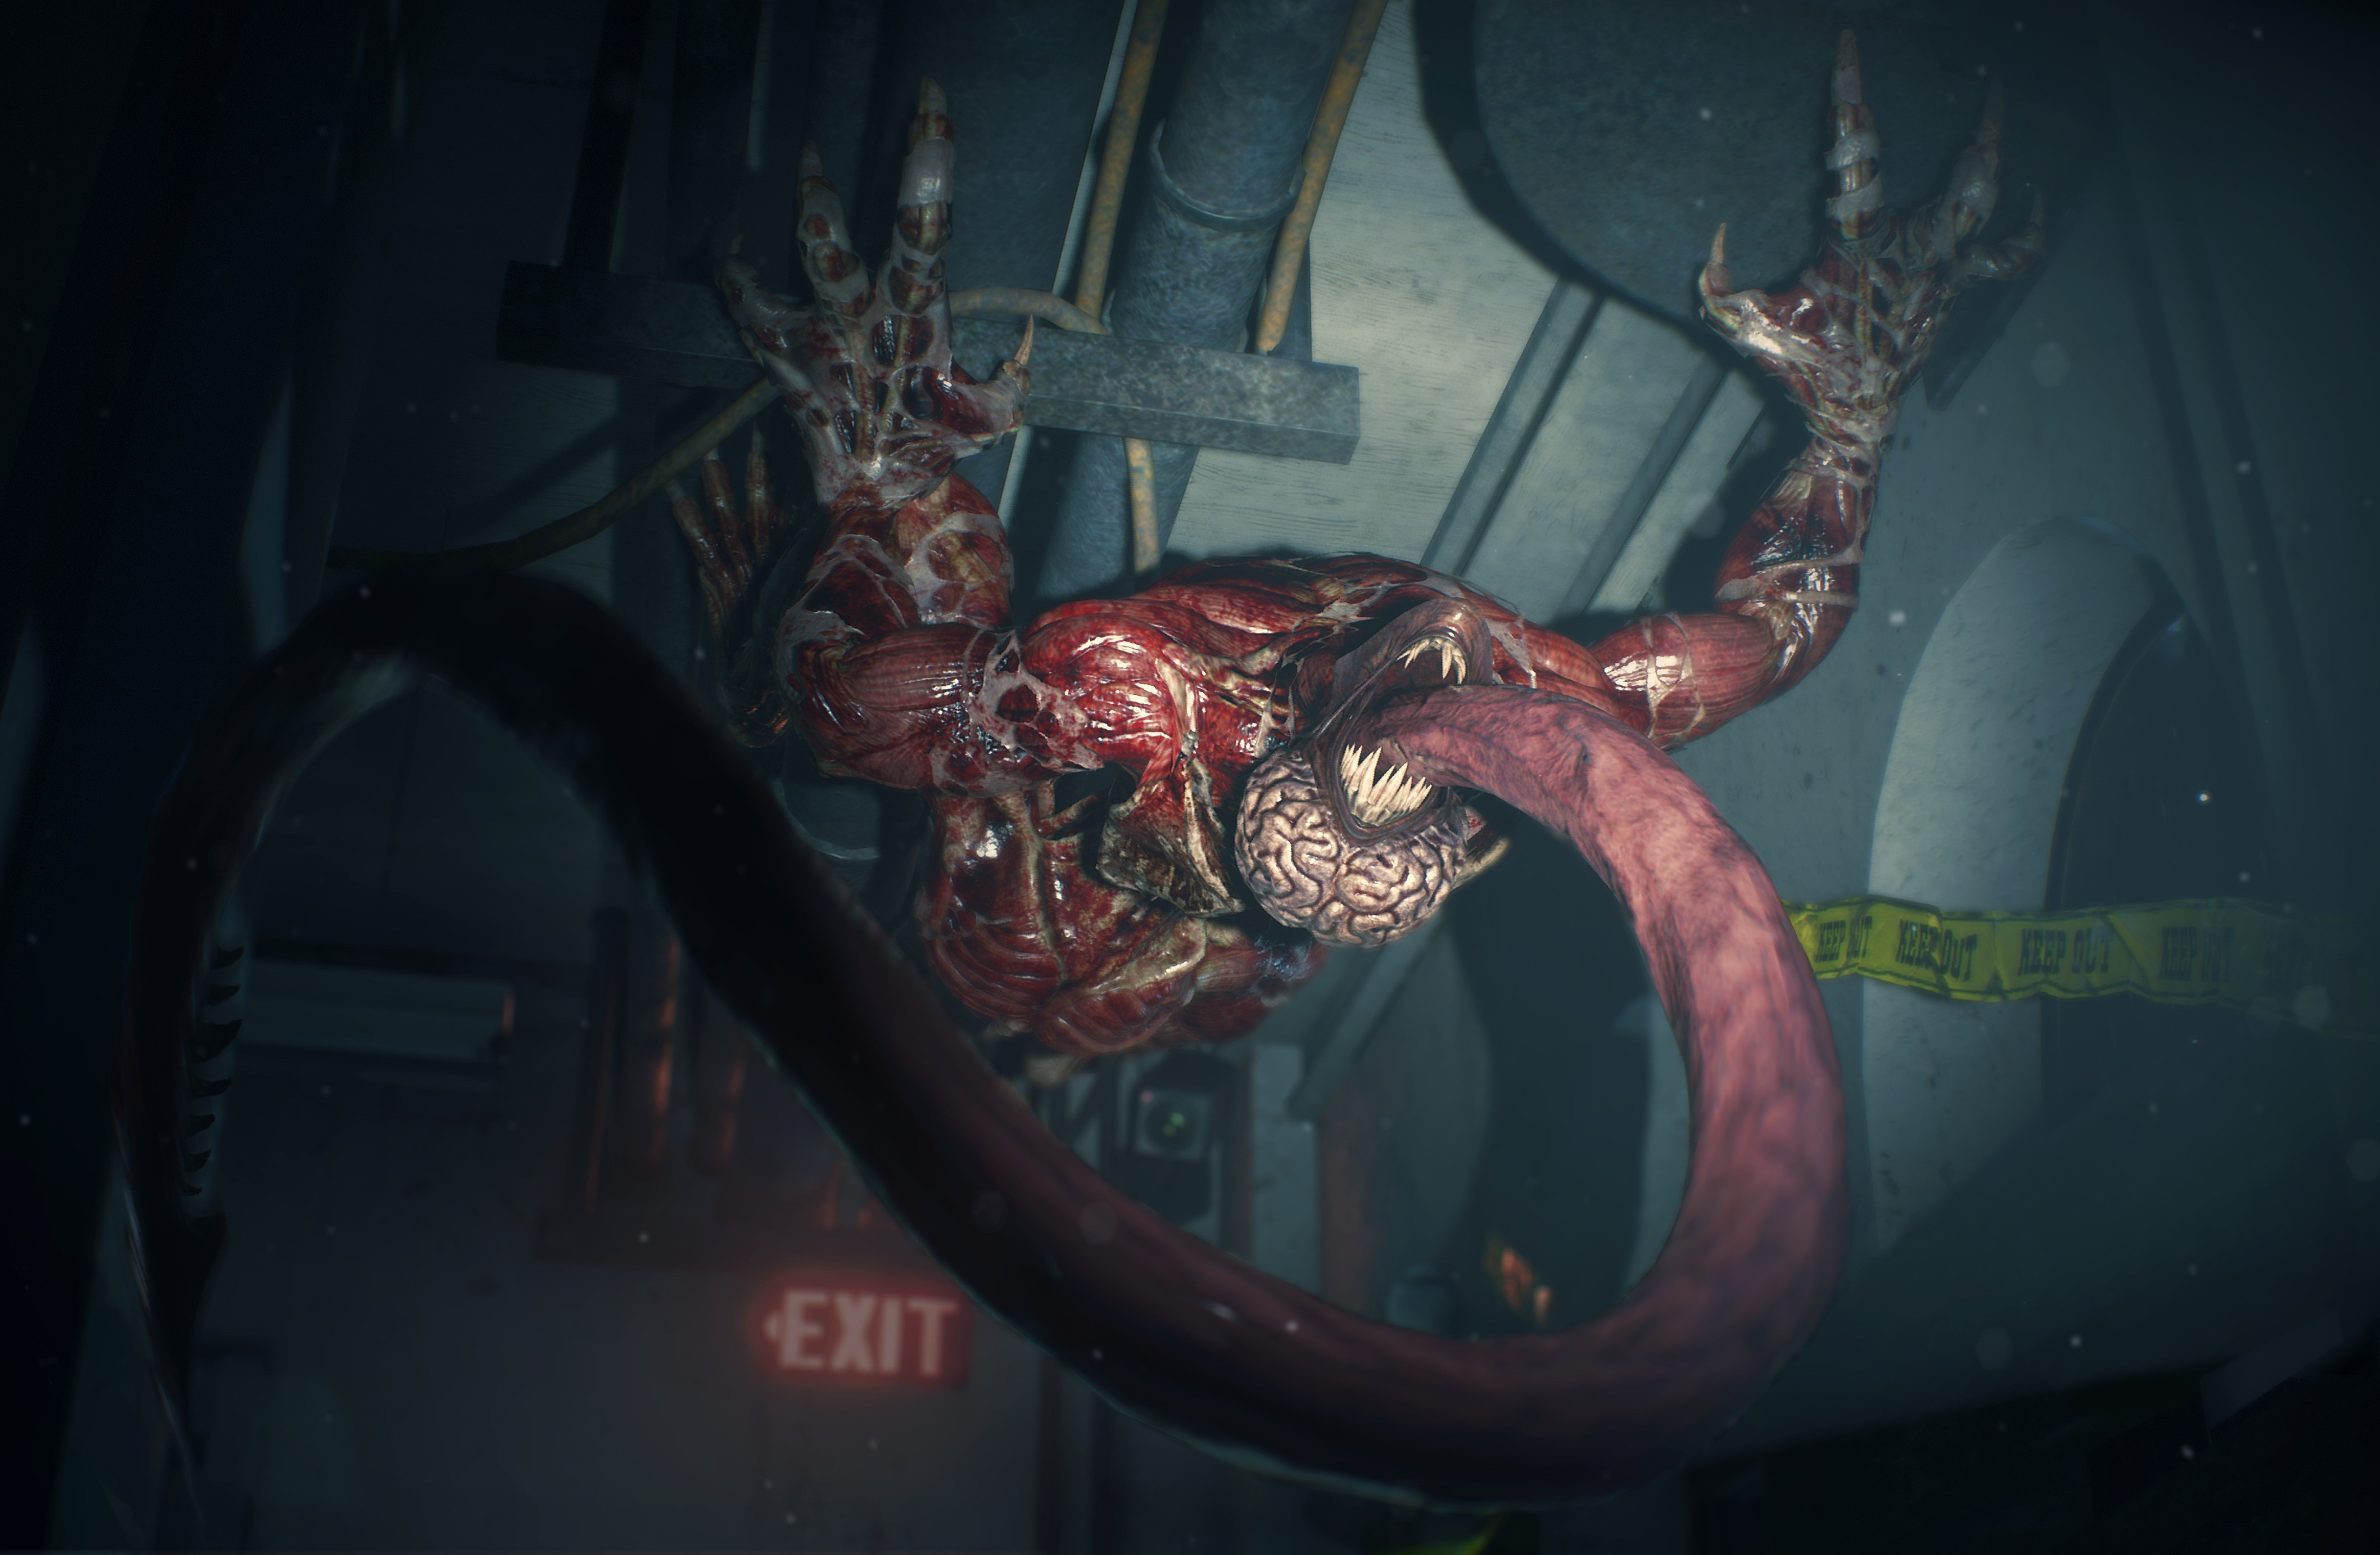 Image for Lickers are as nightmarish as you remember in Resident Evil 2 Remake - hands-on